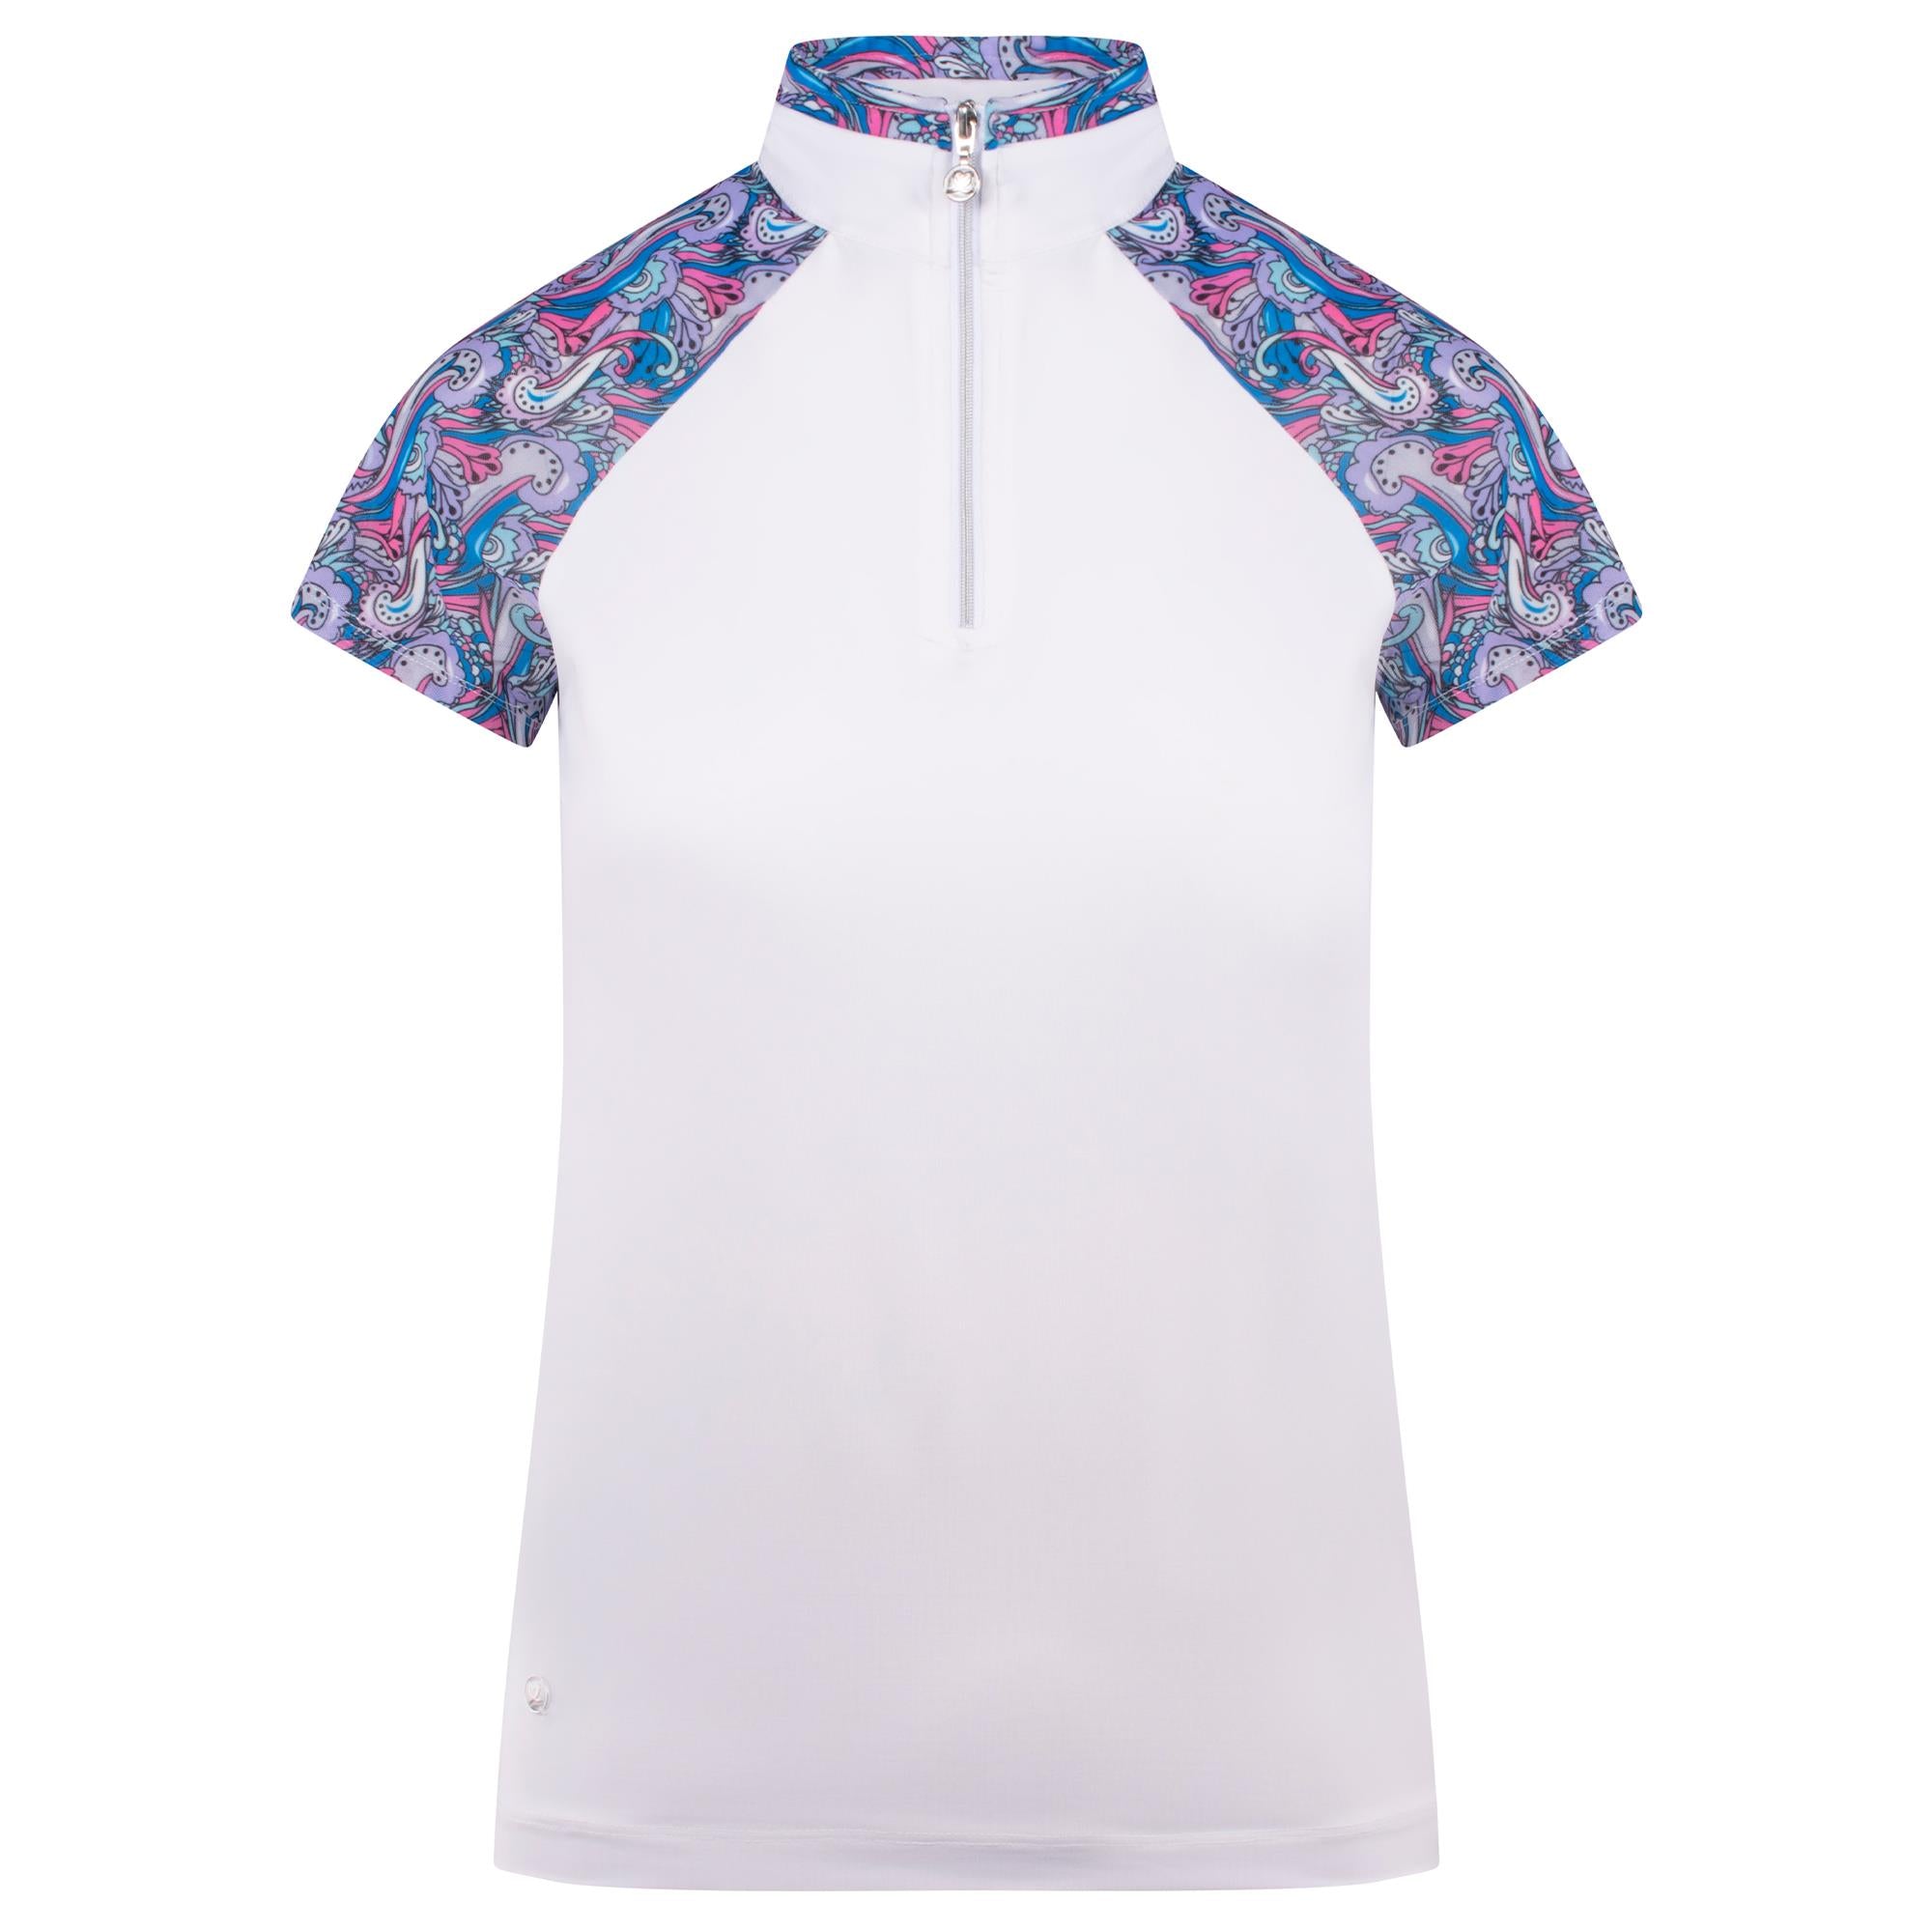 white ladies polo shirt with half zip with jewel detail and patterned shoulders